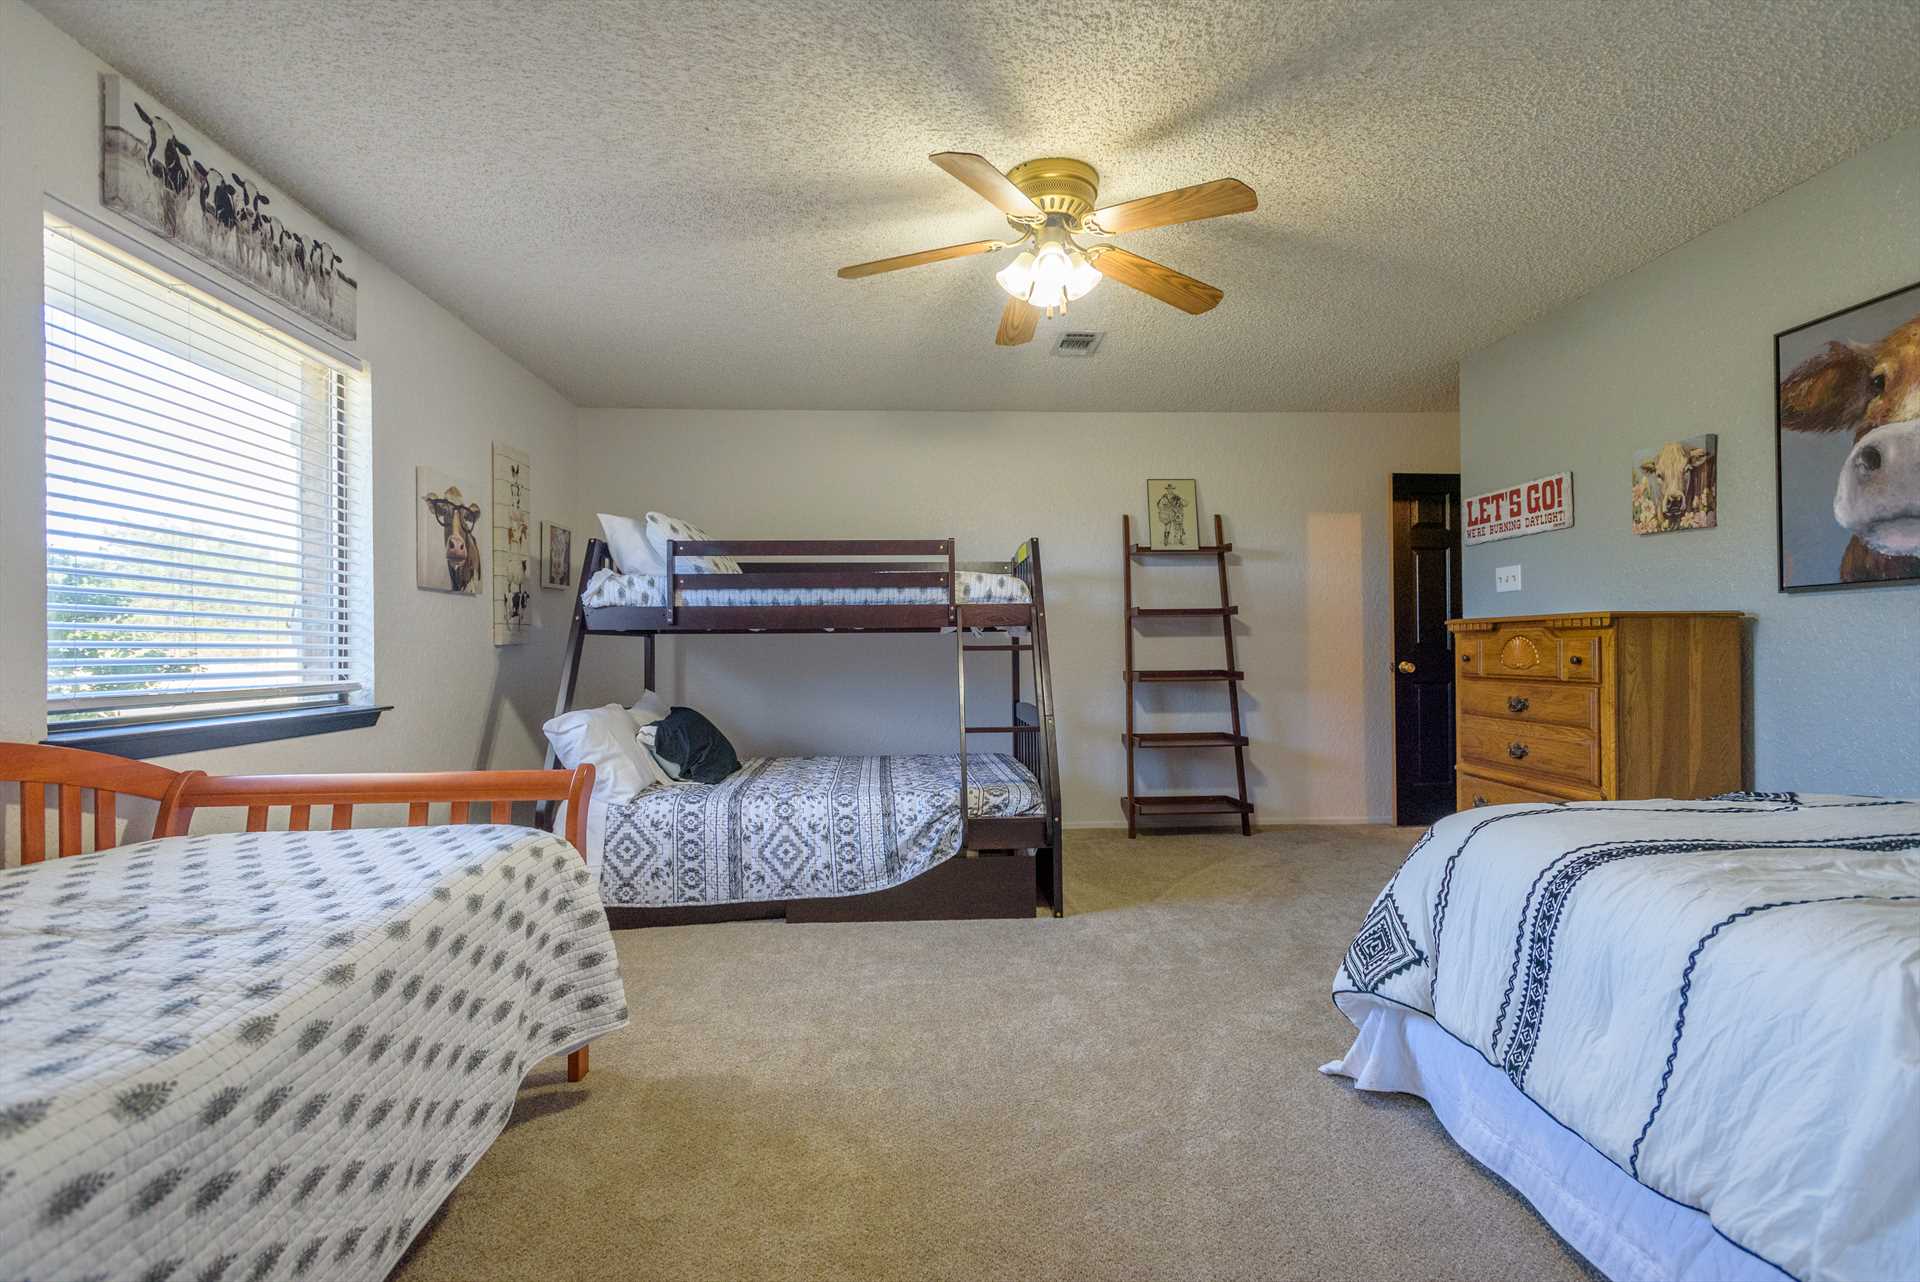                                                 Up to five people can sleep in warm comfort in the ranch's third bedroom, with two full-sized and three single beds! All bedding here comes with clean linens, too.